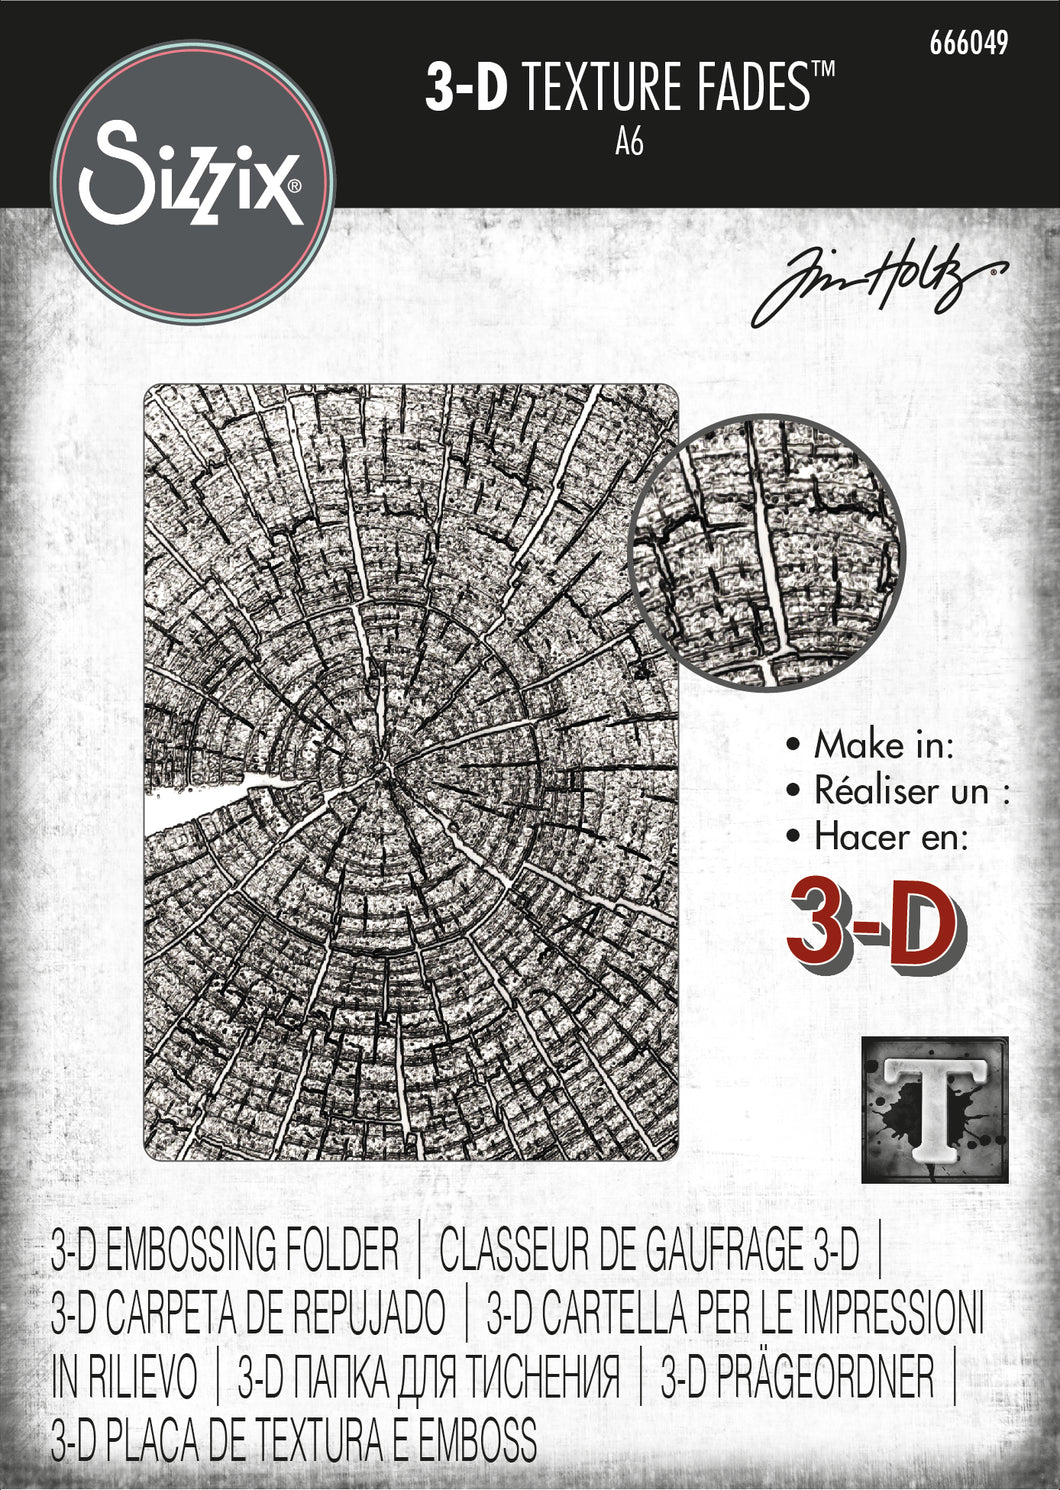 Sizzix 3-D Texture Fades Embossing Folder Tree Rings by Tim Holtz (666049)